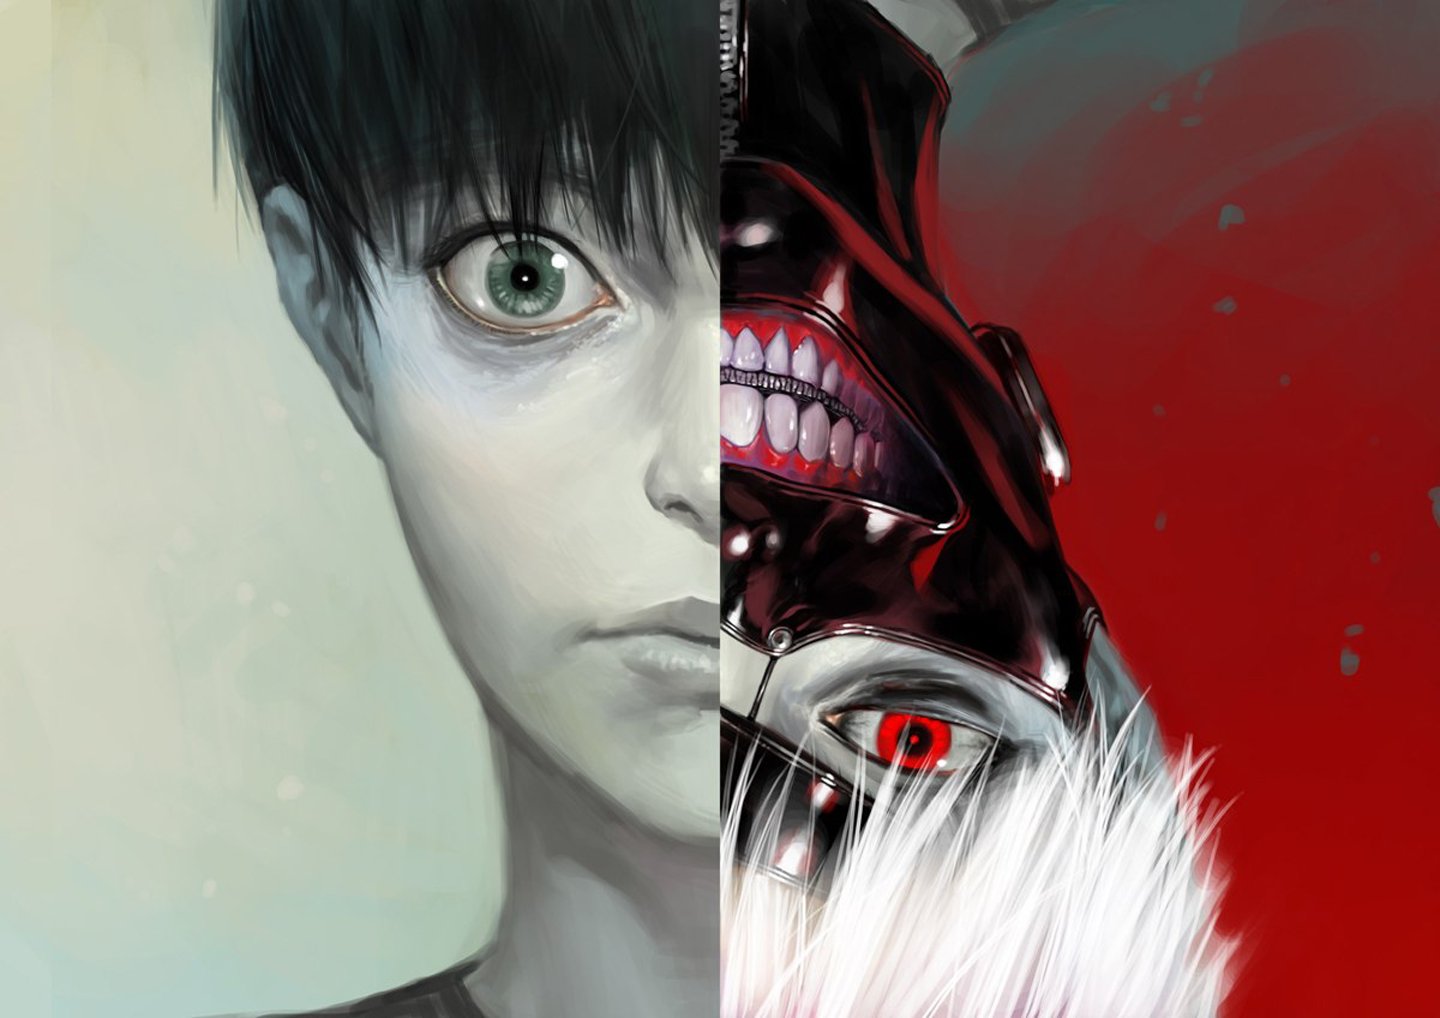 tokyo ghoul opening in english